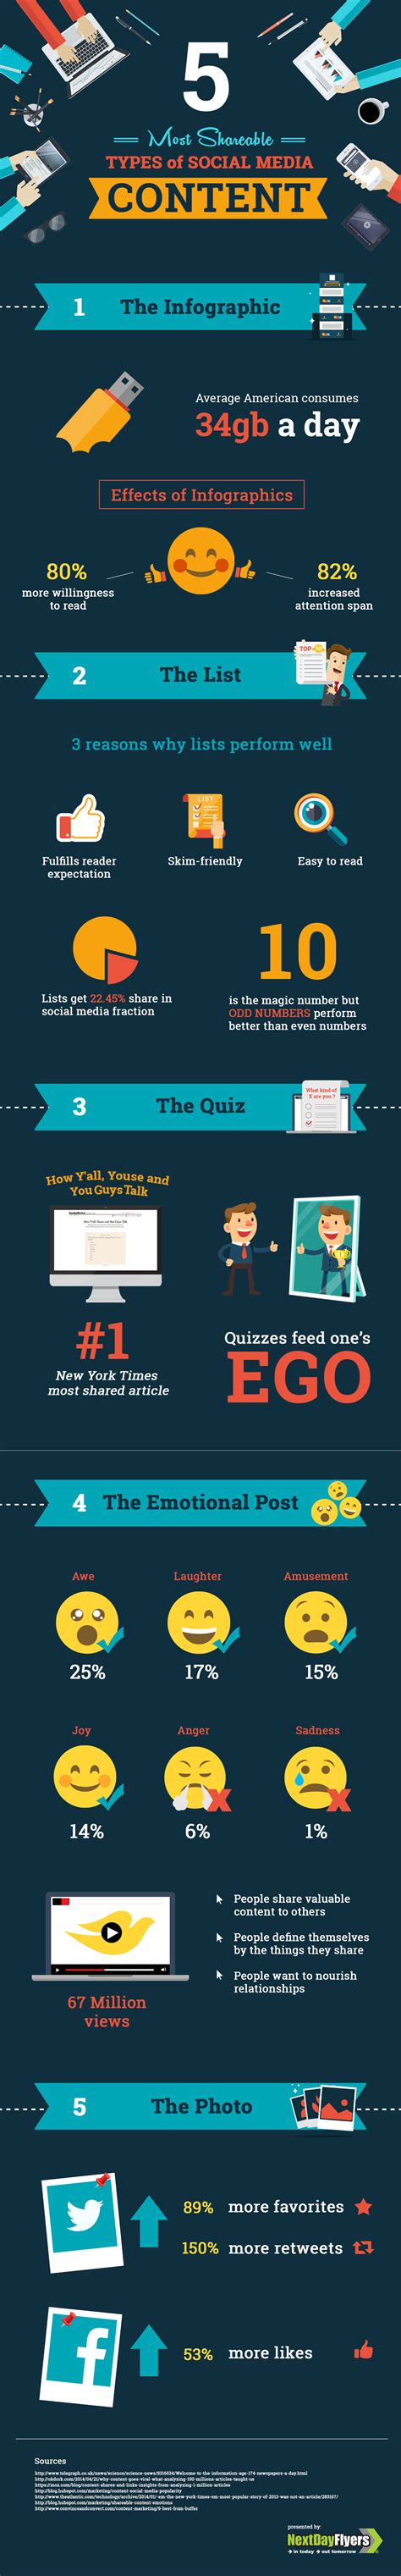 5 Most Shareable Social Media Content Types [infographic]